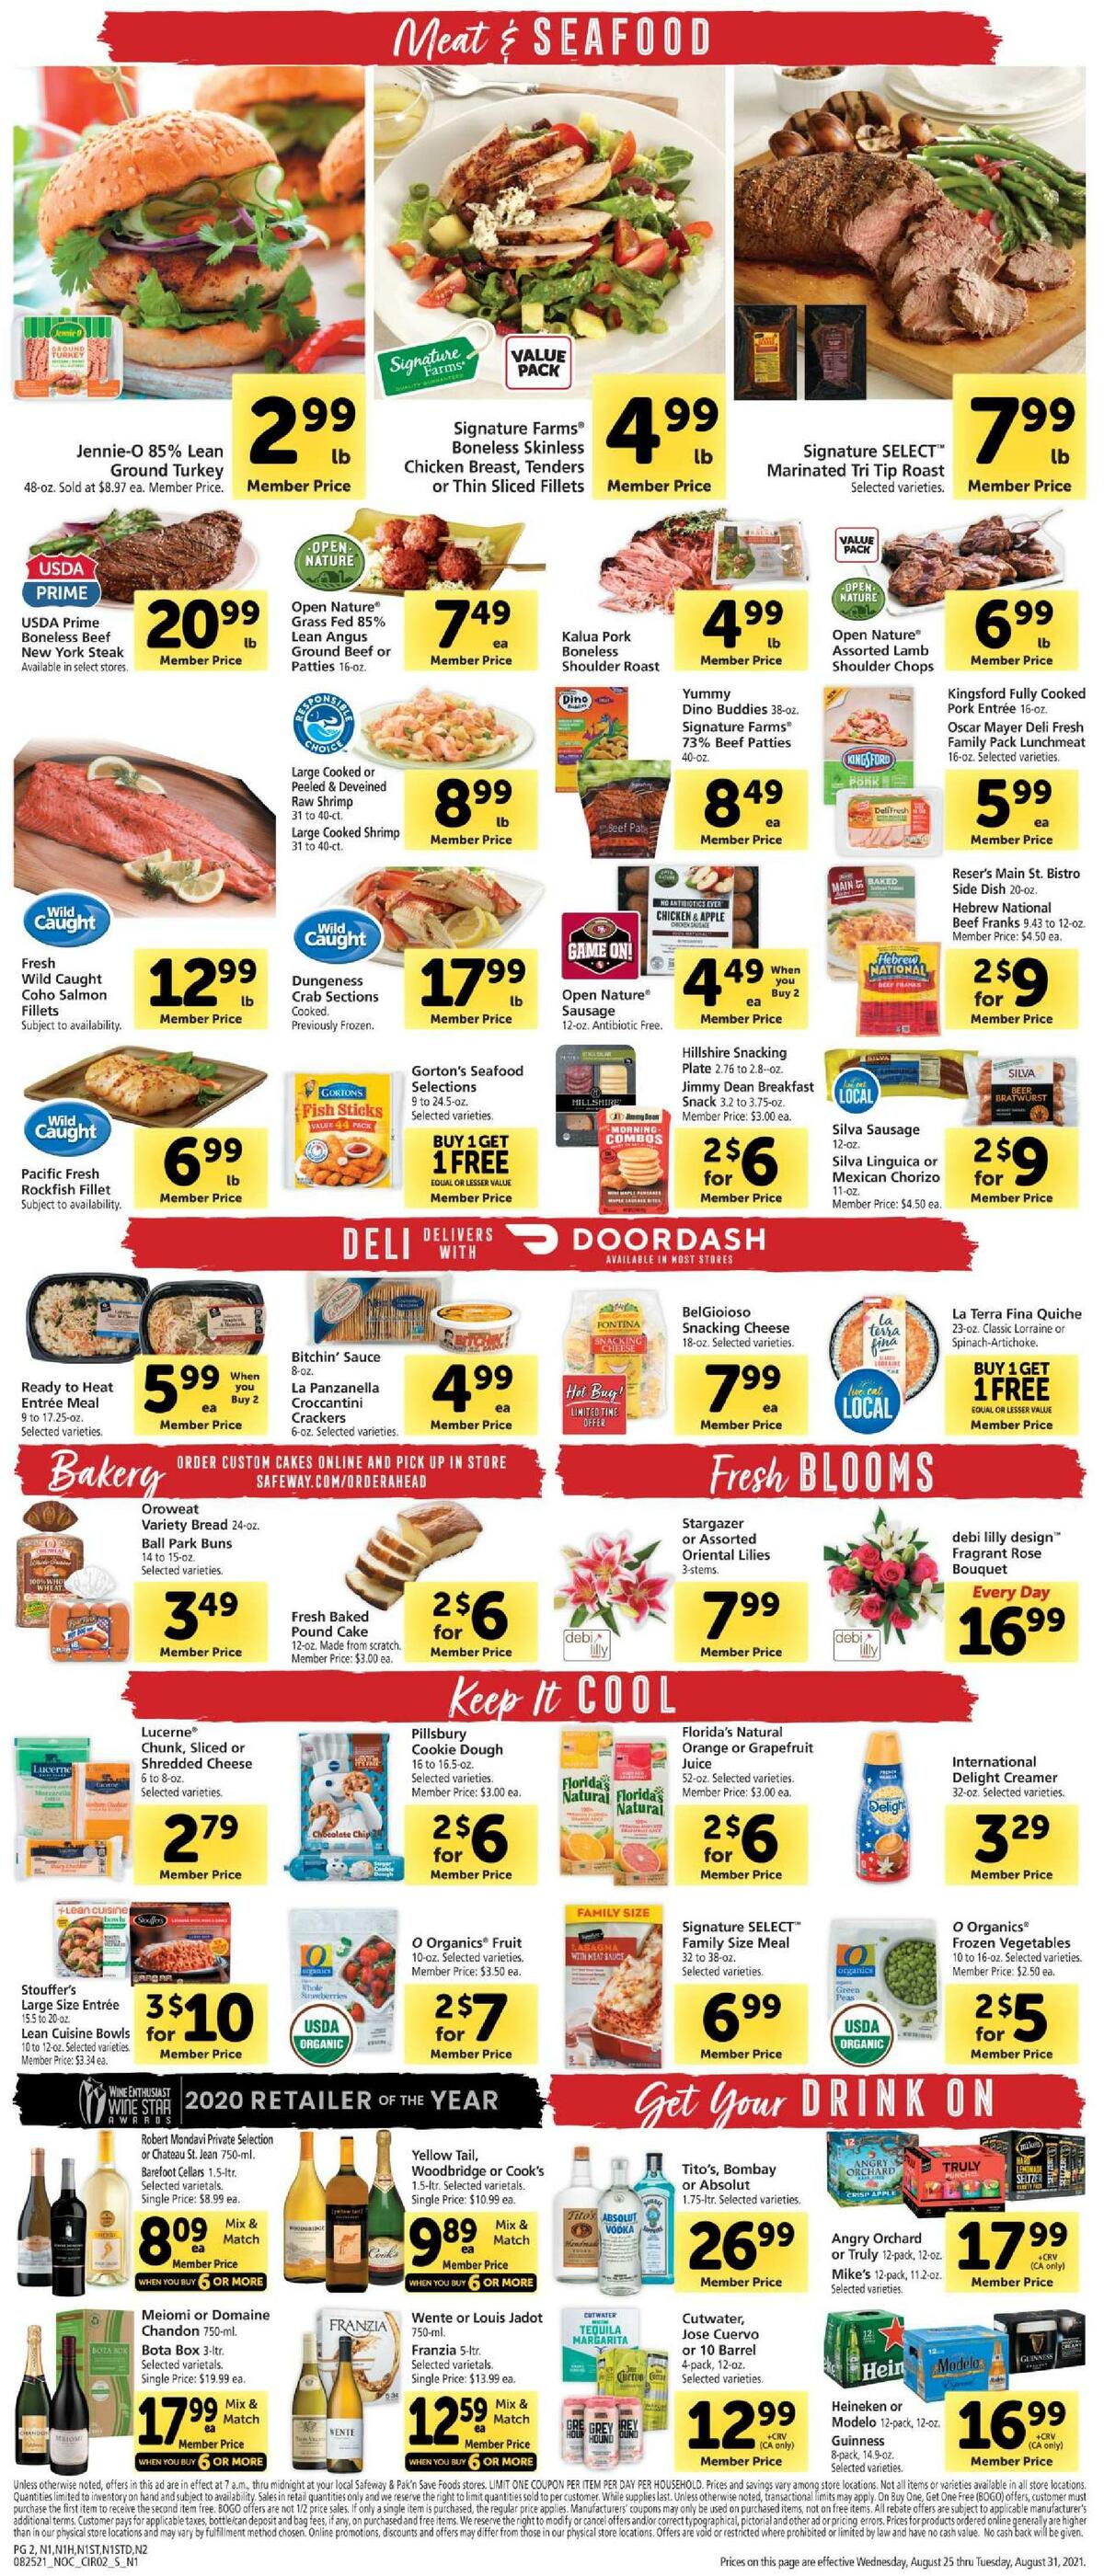 Safeway Weekly Ad from August 25